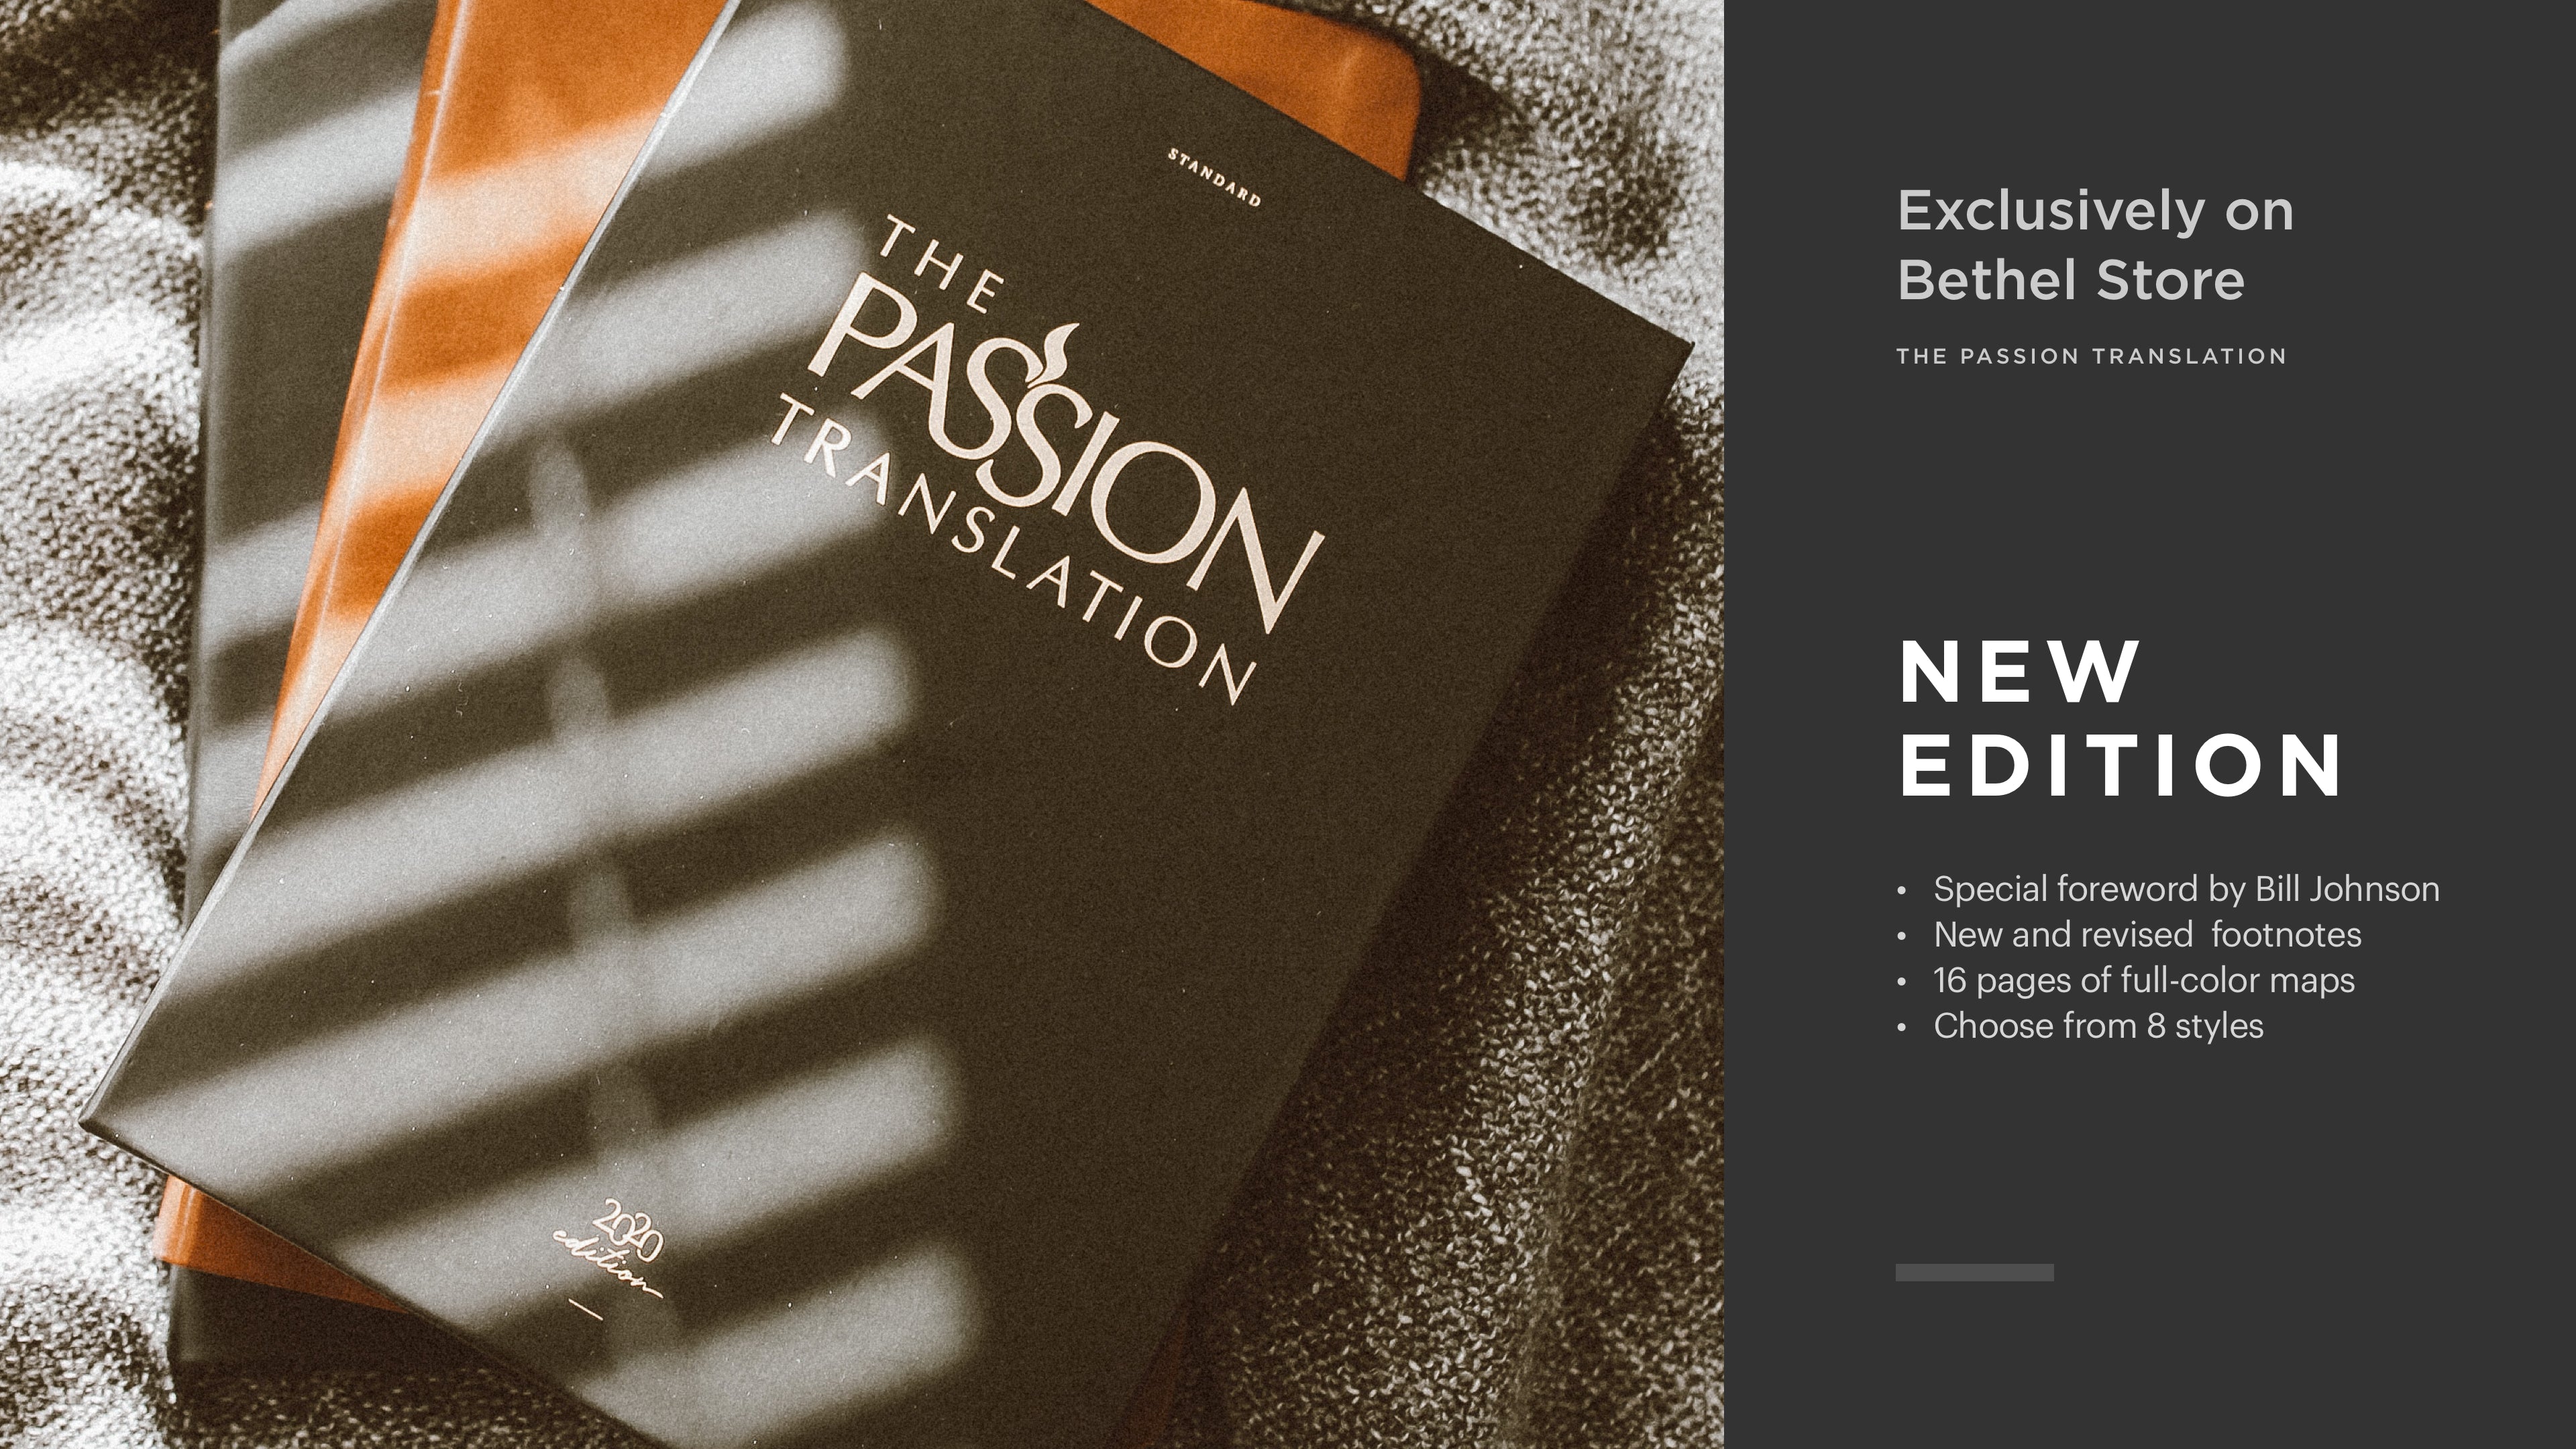 Bethel's 2020 Edition of The Passion Translation